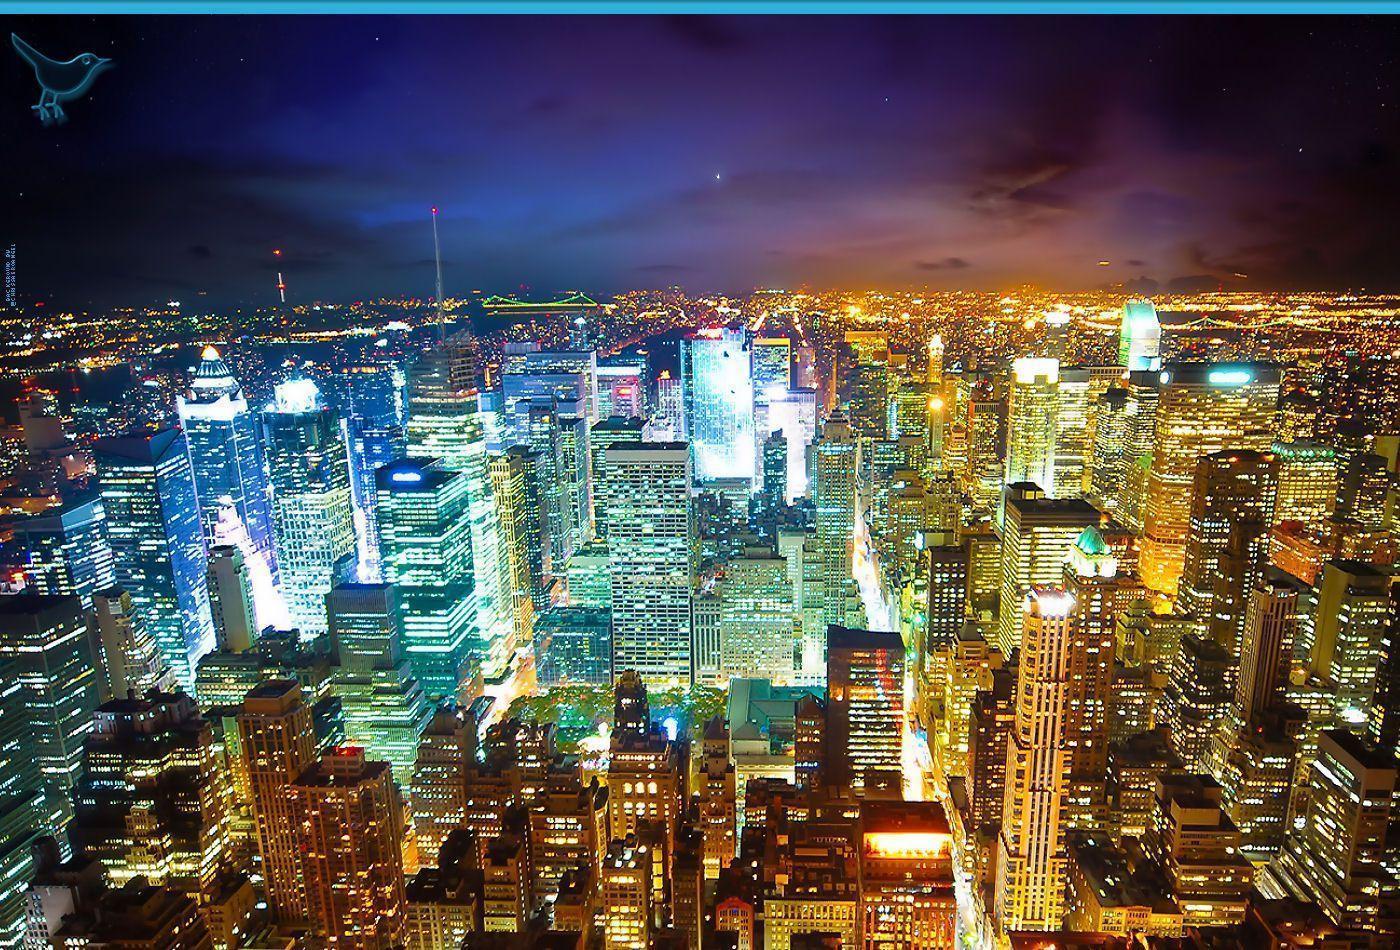 City Lights Twitter Background, City Lights Twitter Themes